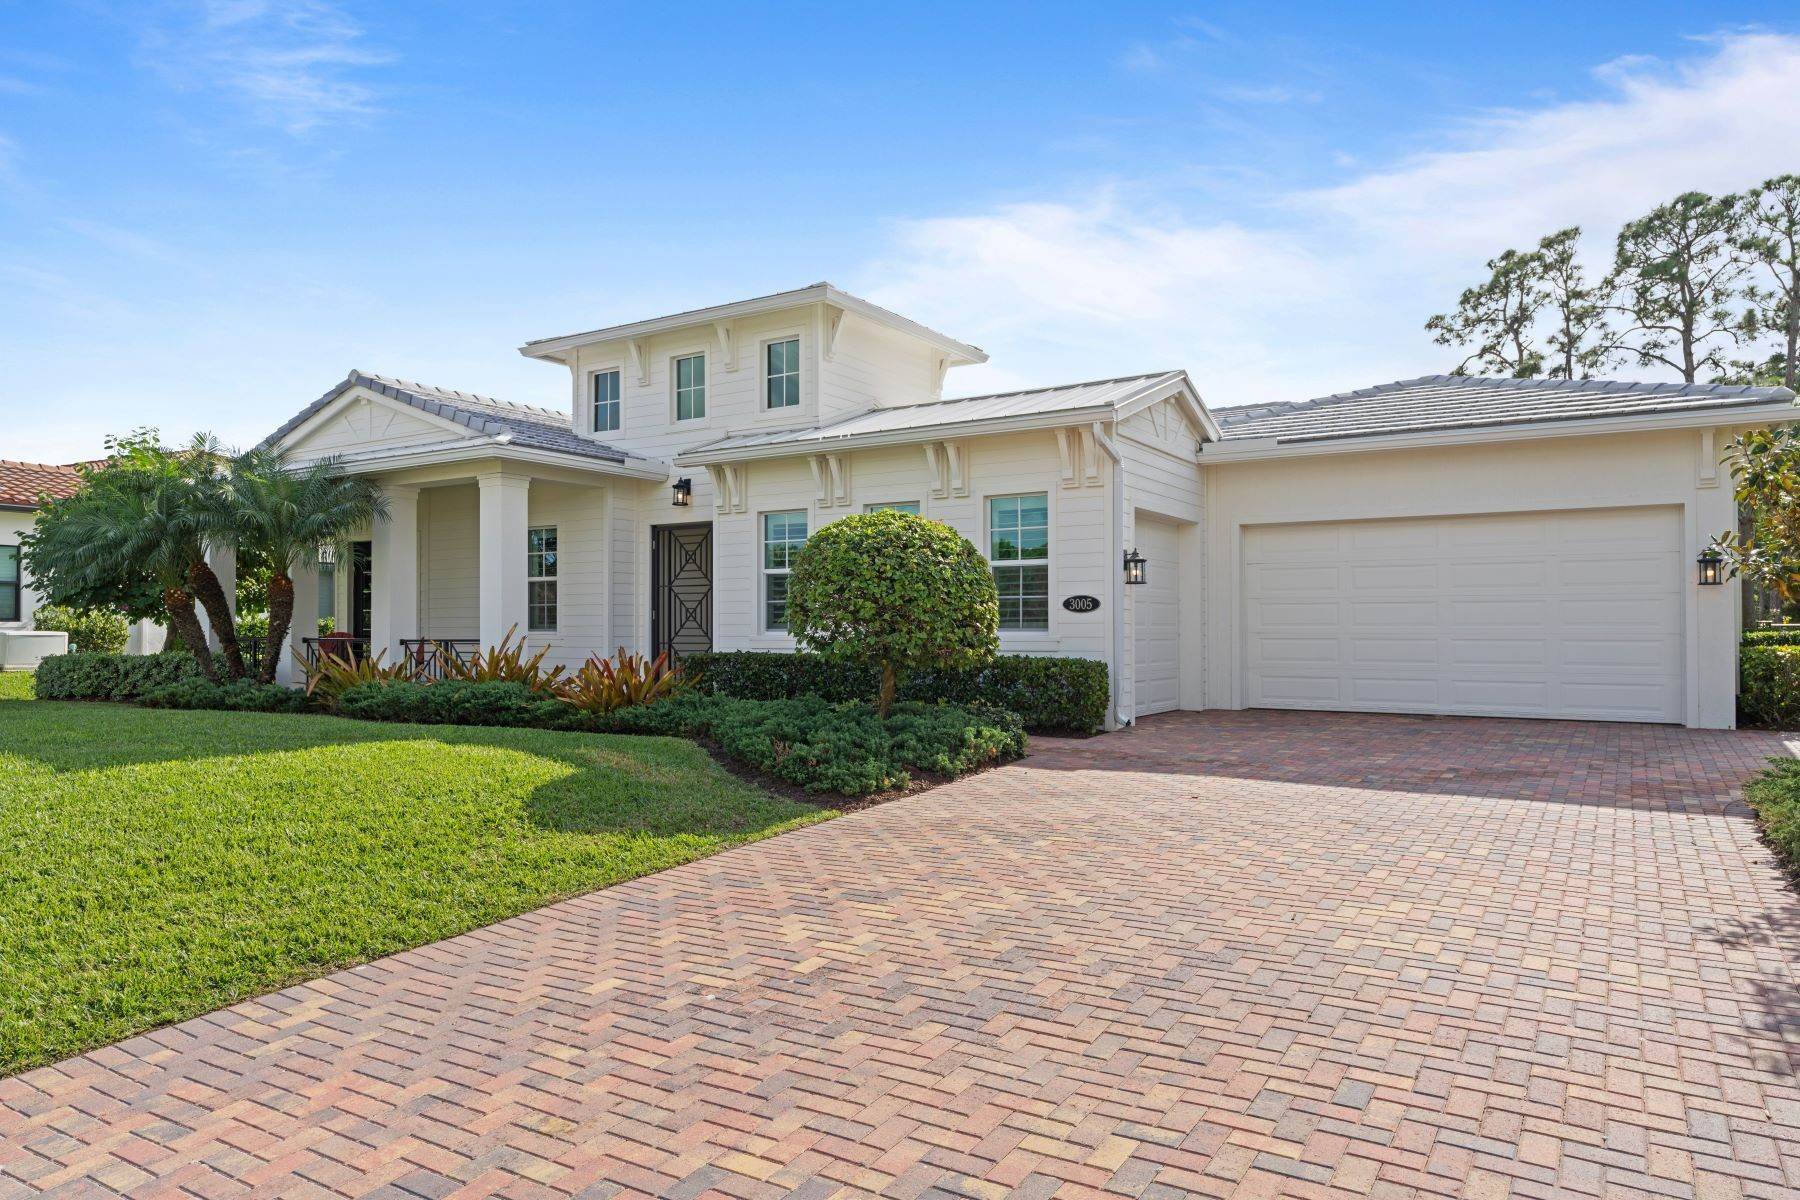 Single Family Homes for Sale at Lakefront Coastal Ranch 3005 Nw Radcliffe Way Palm City, Florida 34990 United States